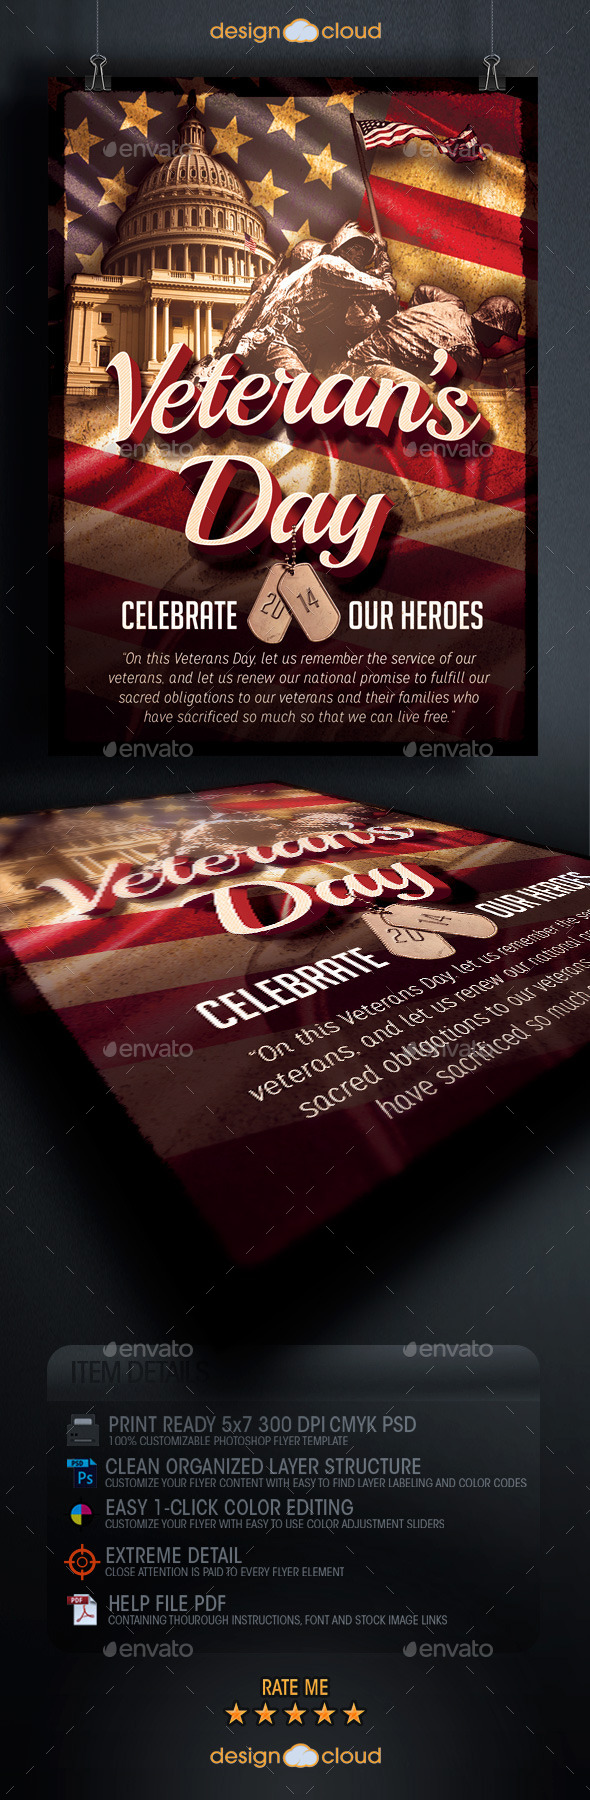 Veteran's Day Flyer Template by Design-Cloud | GraphicRiver